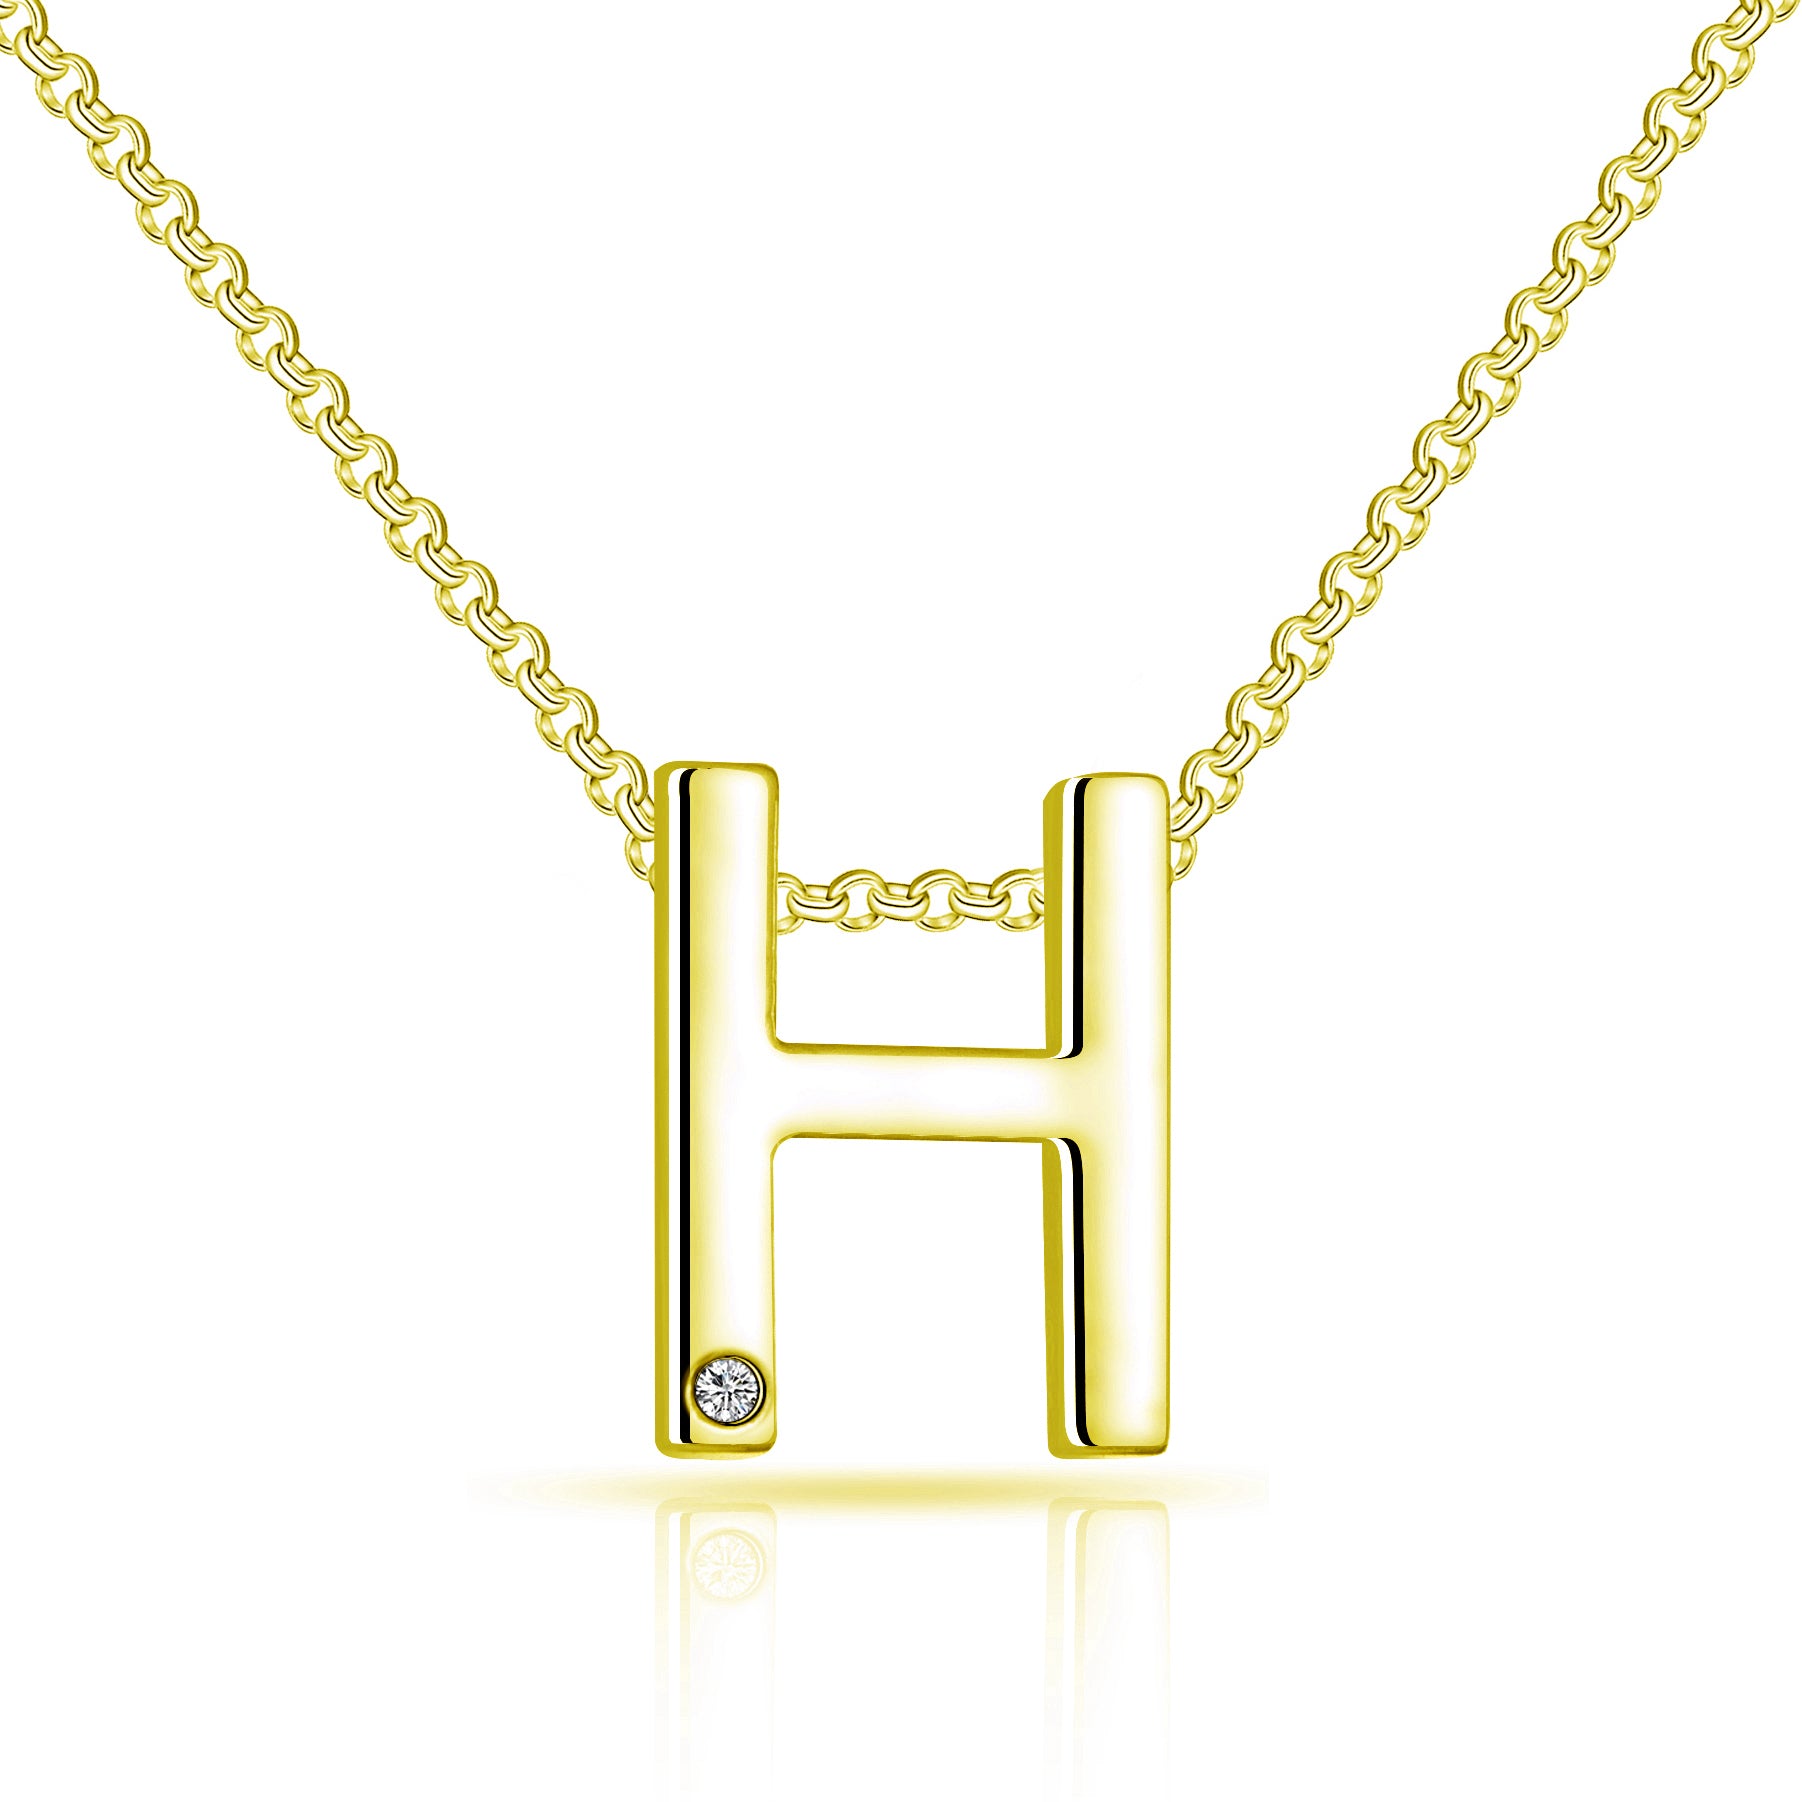 Gold Plated Initial Necklace Letter H Created with Zircondia® Crystals by Philip Jones Jewellery